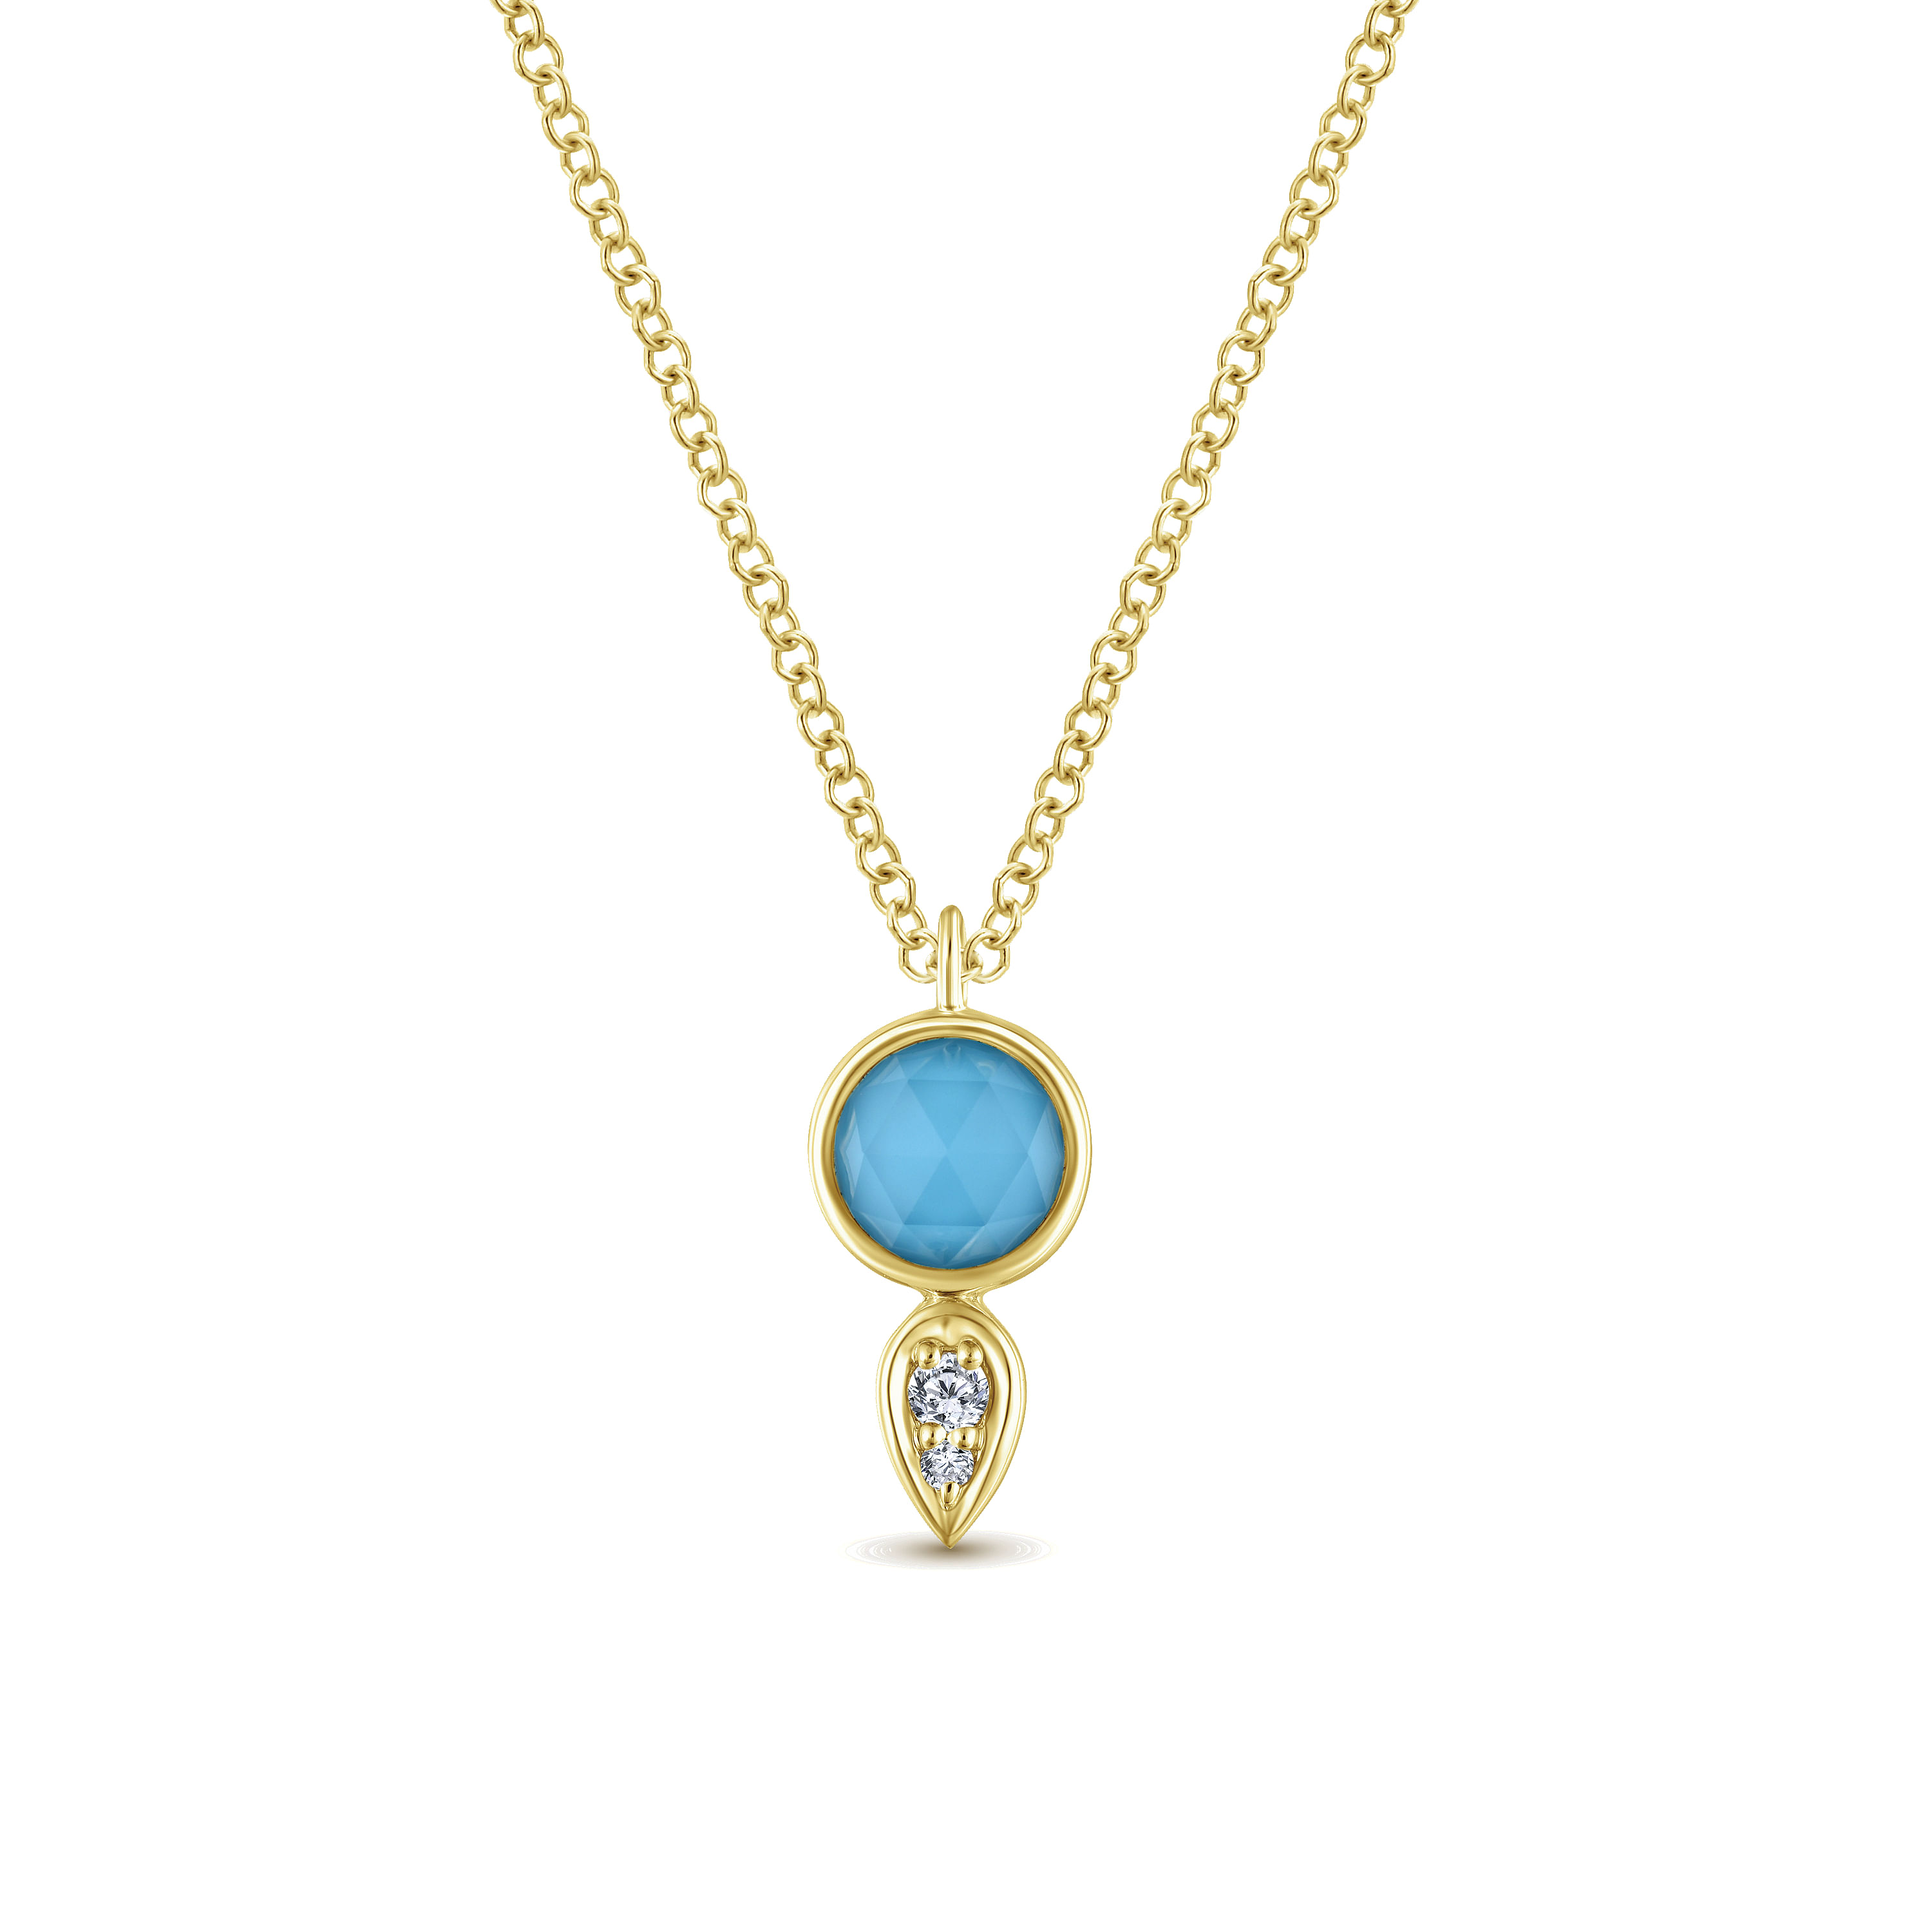 14K Yellow Gold Rock Crystal and Turqouise with Diamond Accent Necklace